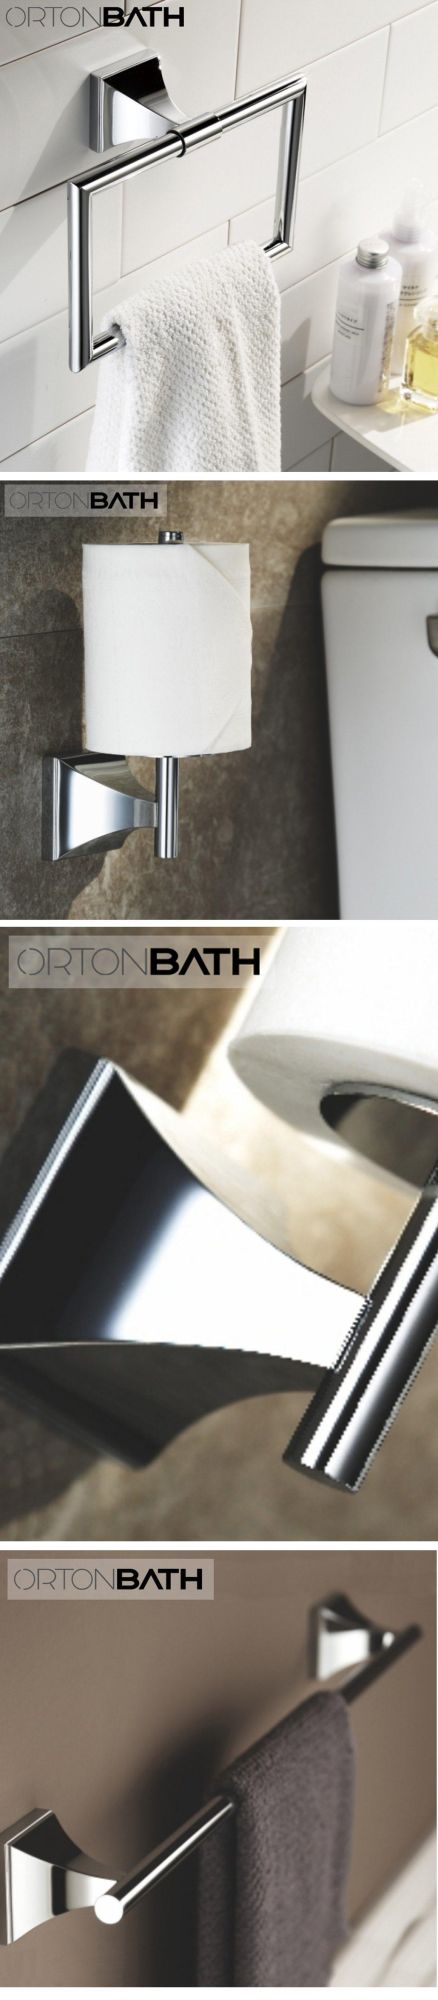 Ortonbath 8 Pieces Brass 304 Stainless Easy to Install Towel Rack Set Include Towel Bar, Toilet Paper Holder, Towel Ring and 5 Robe Hooks, Bathroom Accessory